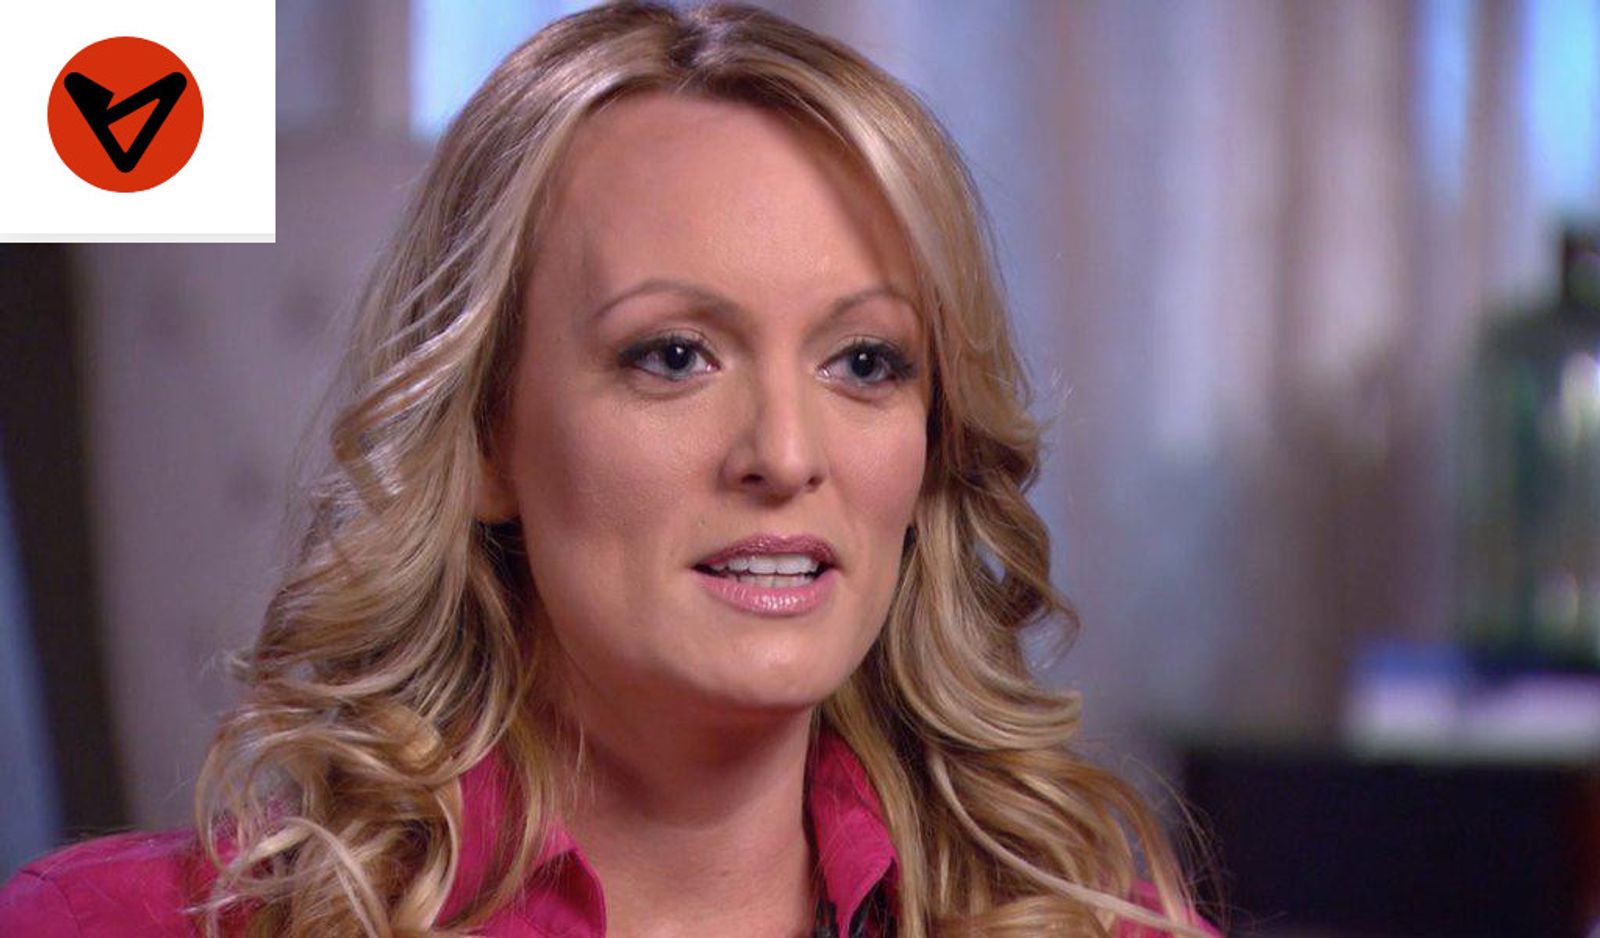 Stormy Daniels to Integrate Vice Industry Token on Official Site